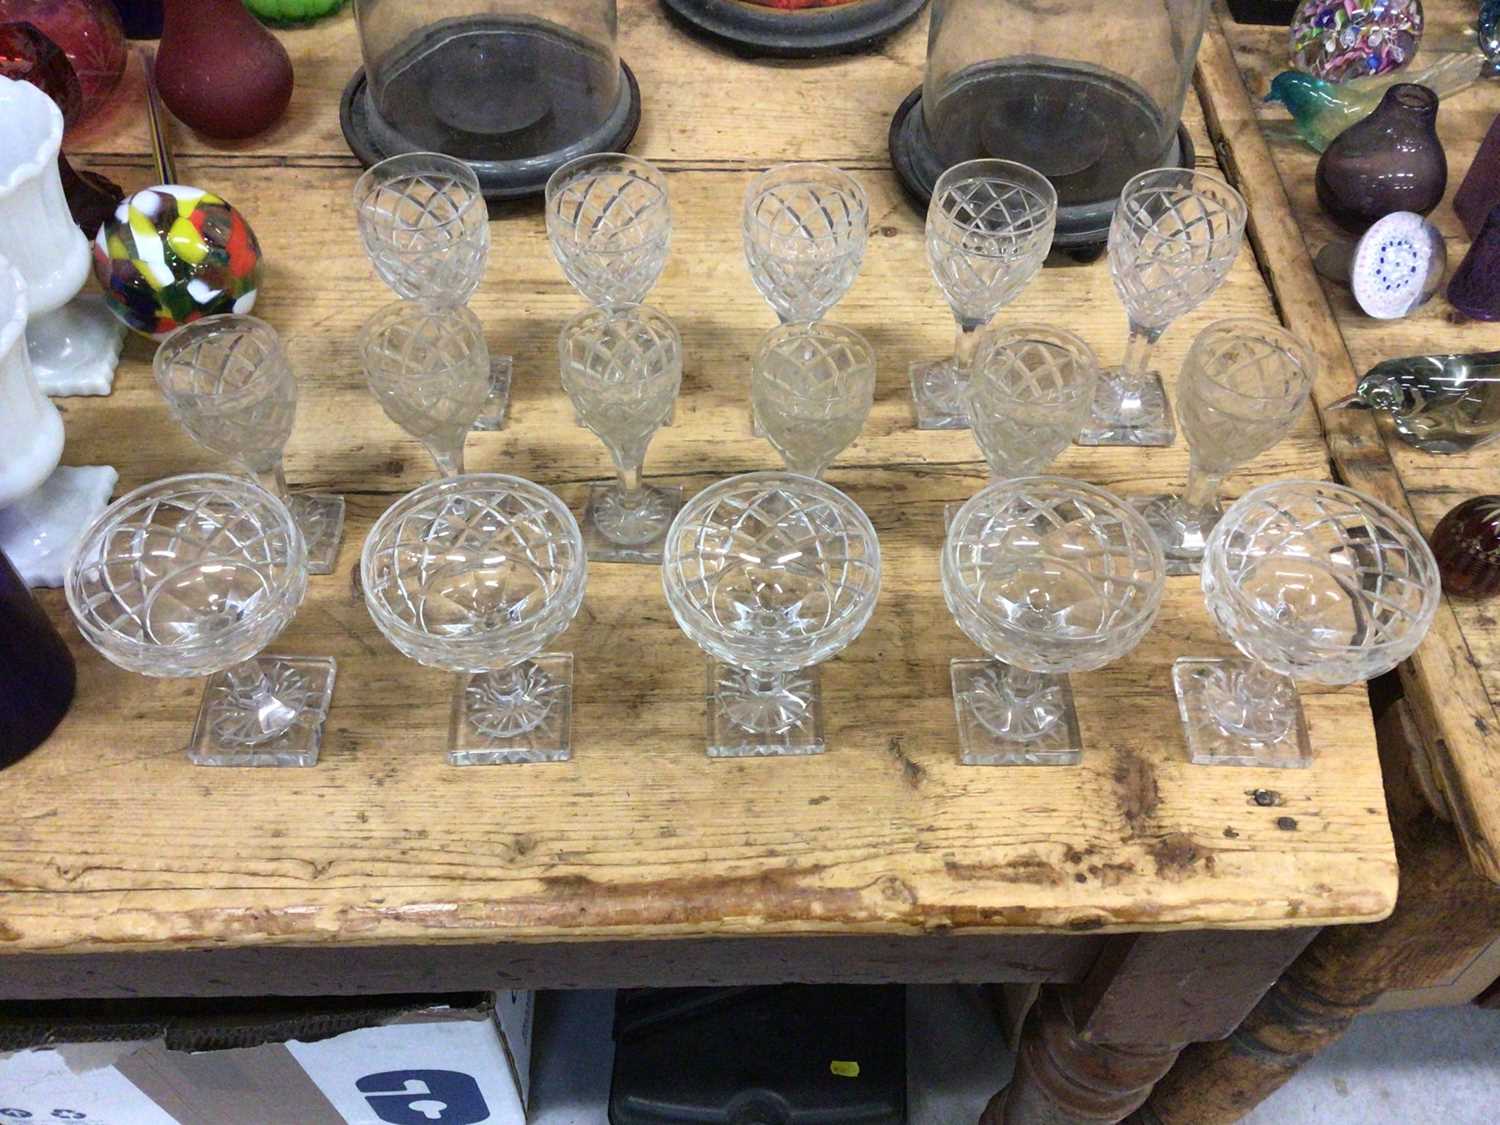 Lot 14 - Good collection of 19th century drinking glasses, diamond-cut with square bases, sixteen glasses overall in three different sizes